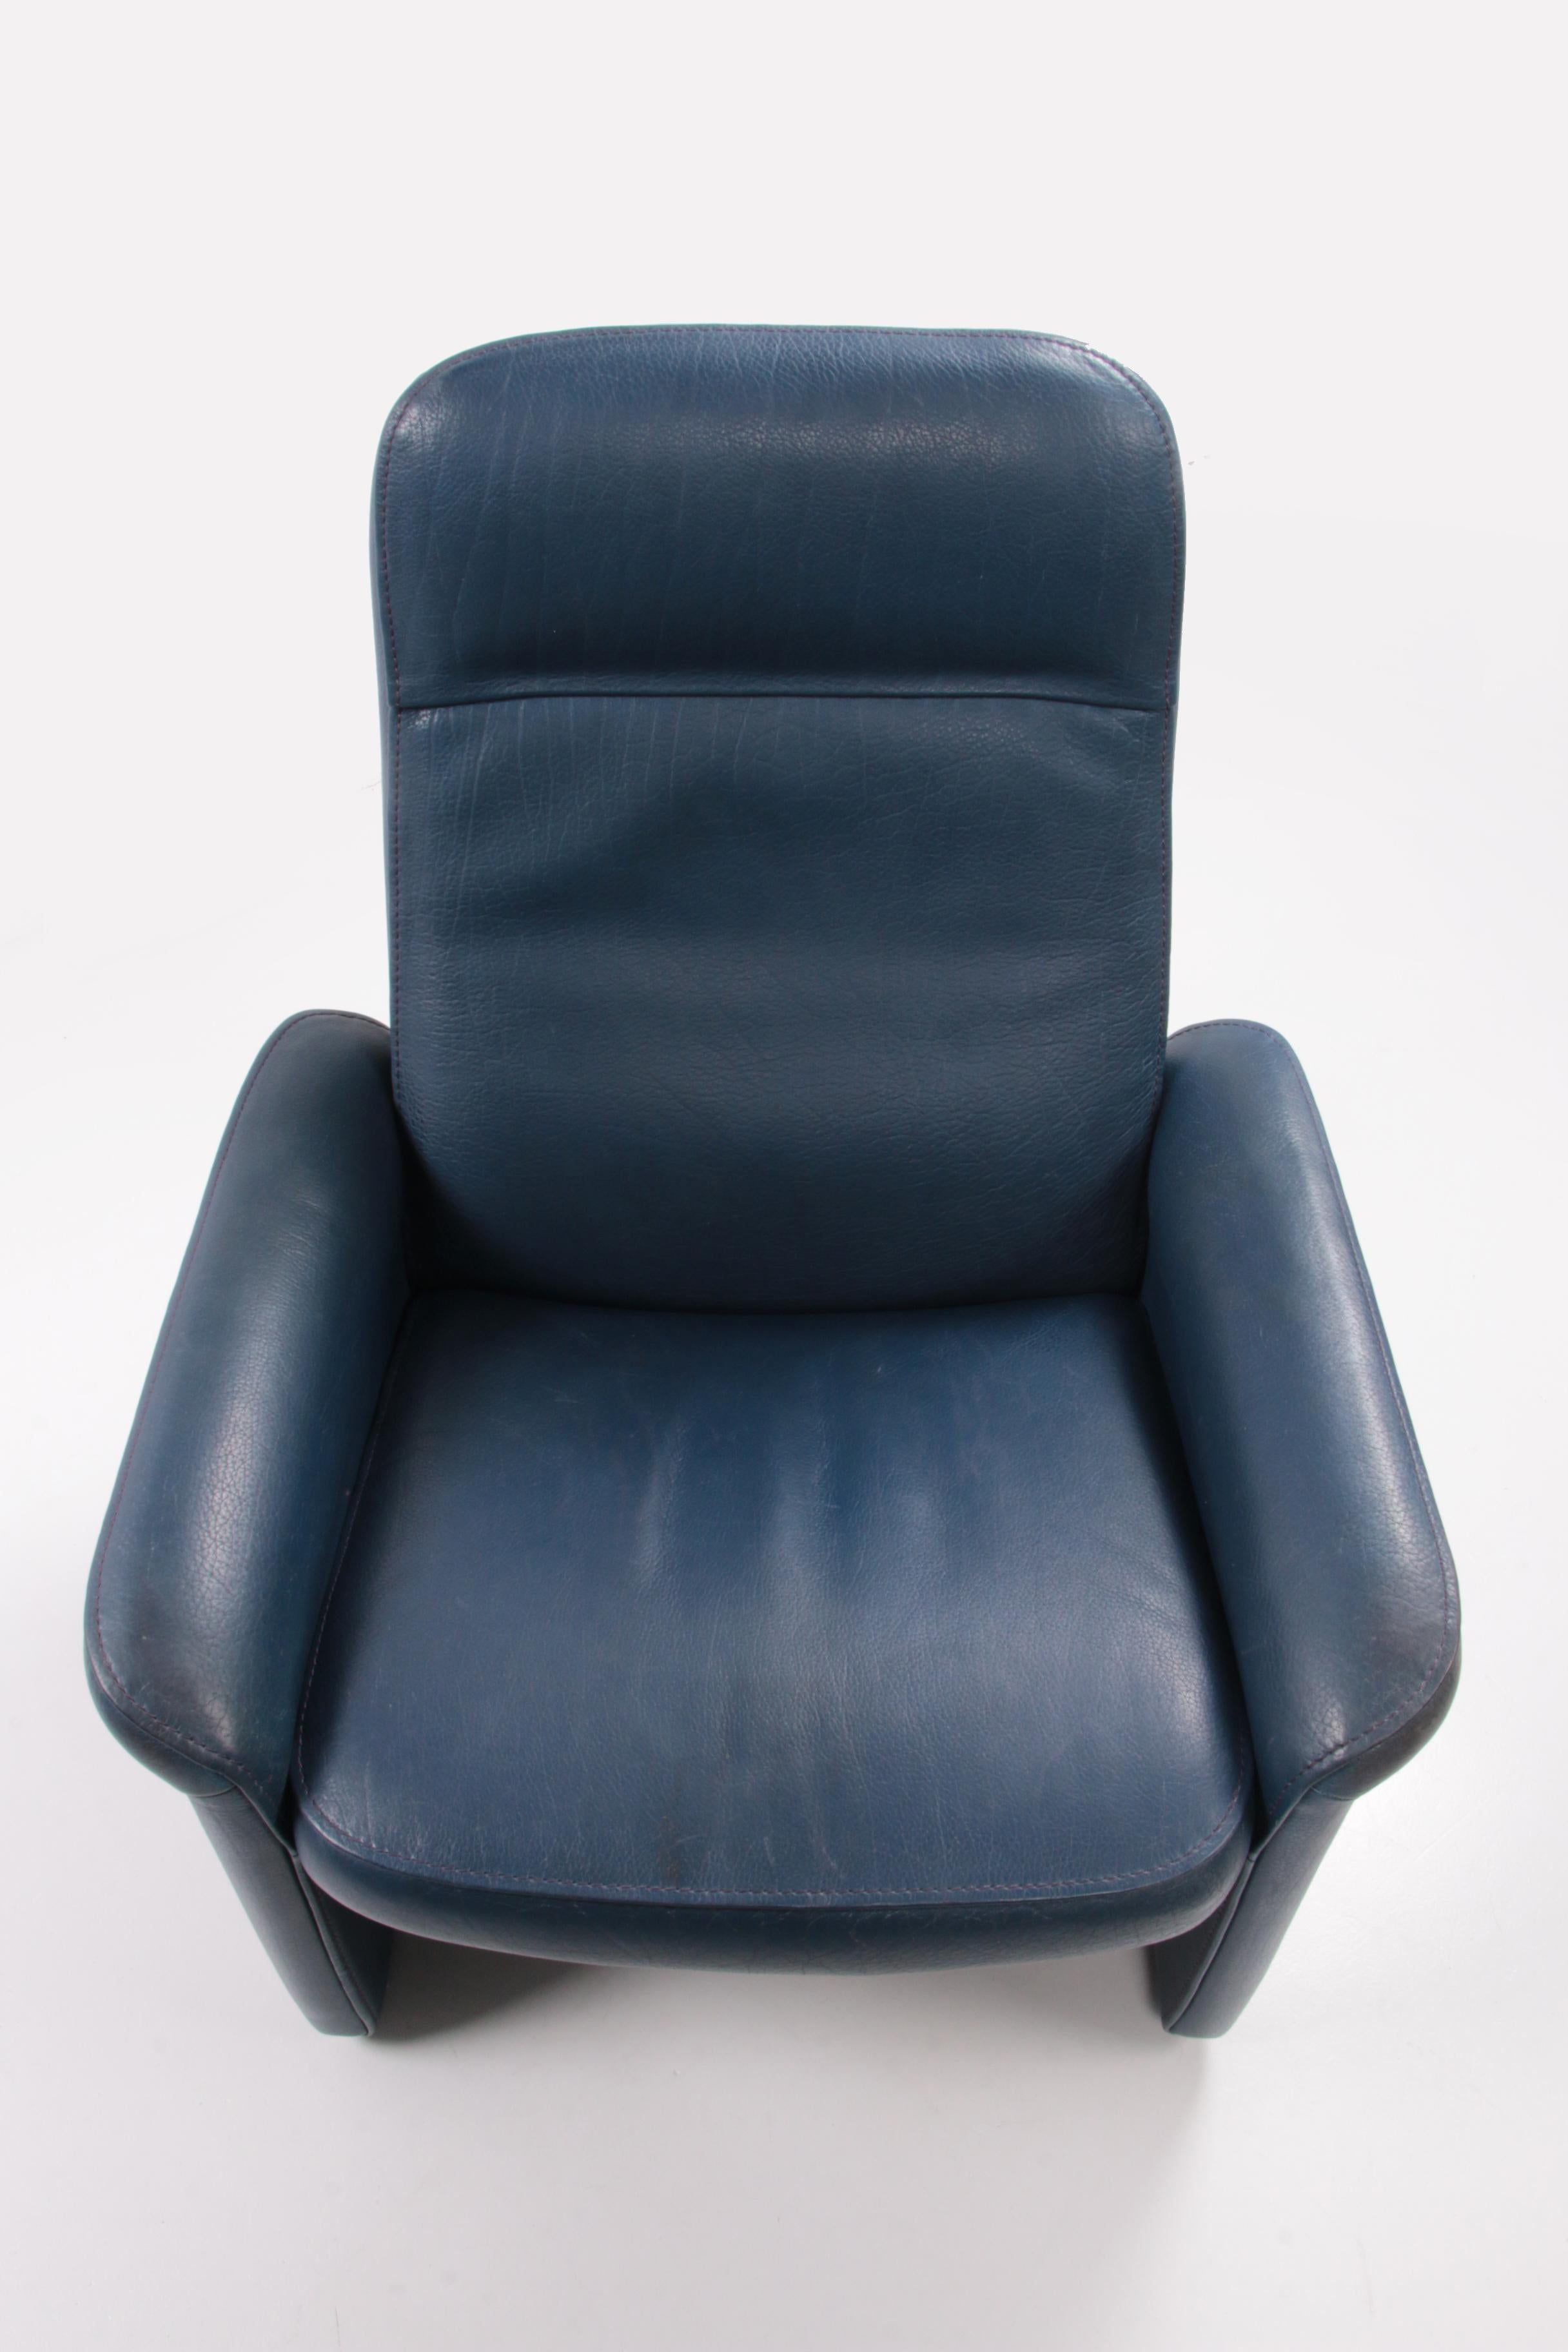 De Sede Ds 50 Relax Armchair with Hocker Leather Petrol Colour, 1980 Switzerland 6